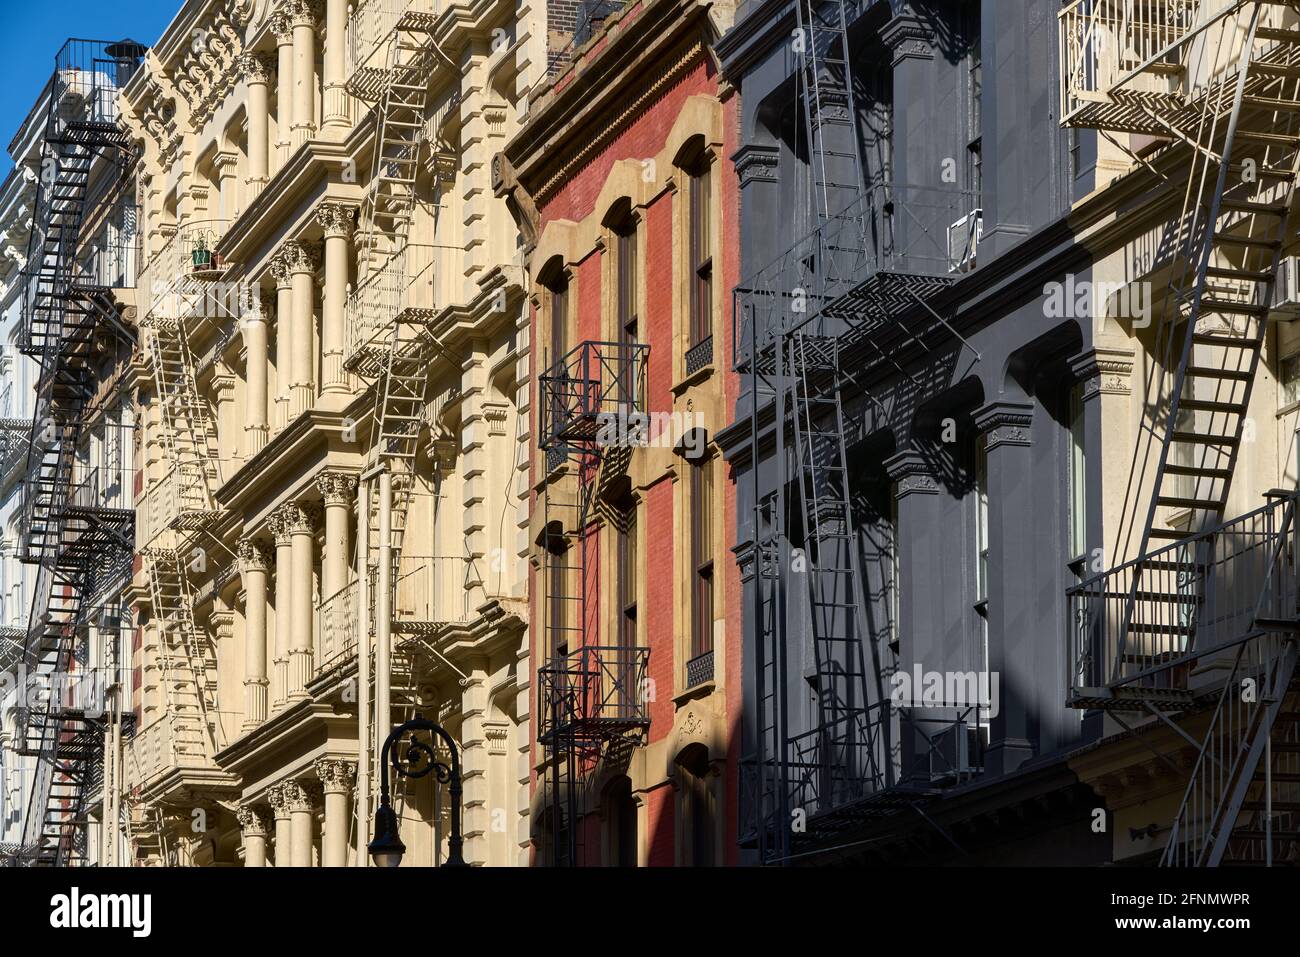 Typical building facades in SoHo, the Cast Iron Historic District with distinct late 19th century architecture. Lower Manhattan, New York City, USA Stock Photo